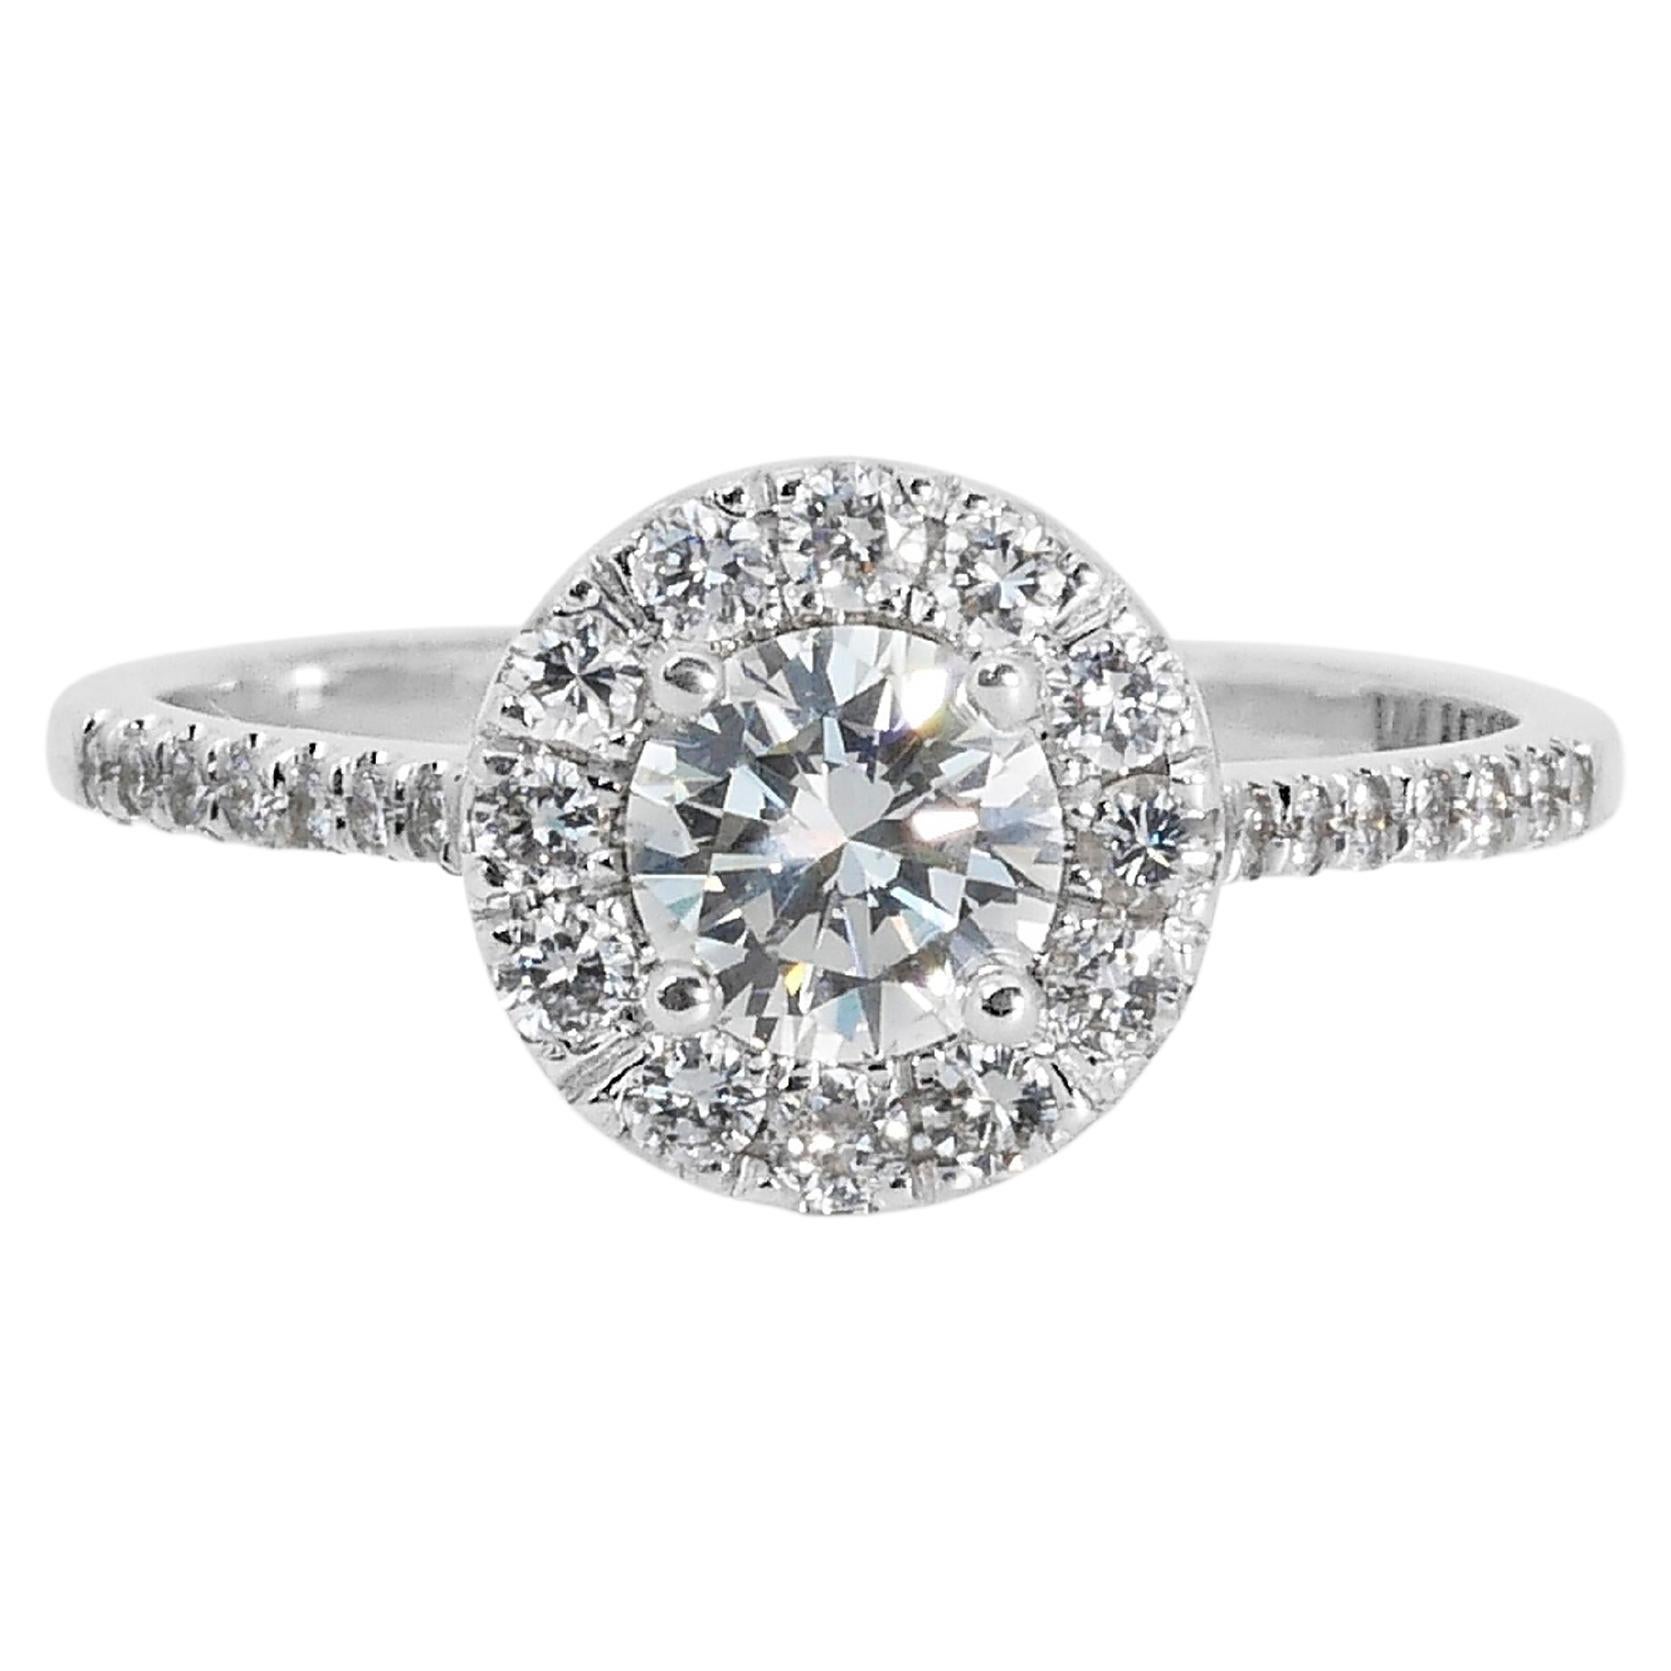 Stunning 1.35ct Diamond Halo Ring in 18k White Gold - GIA Certified For Sale